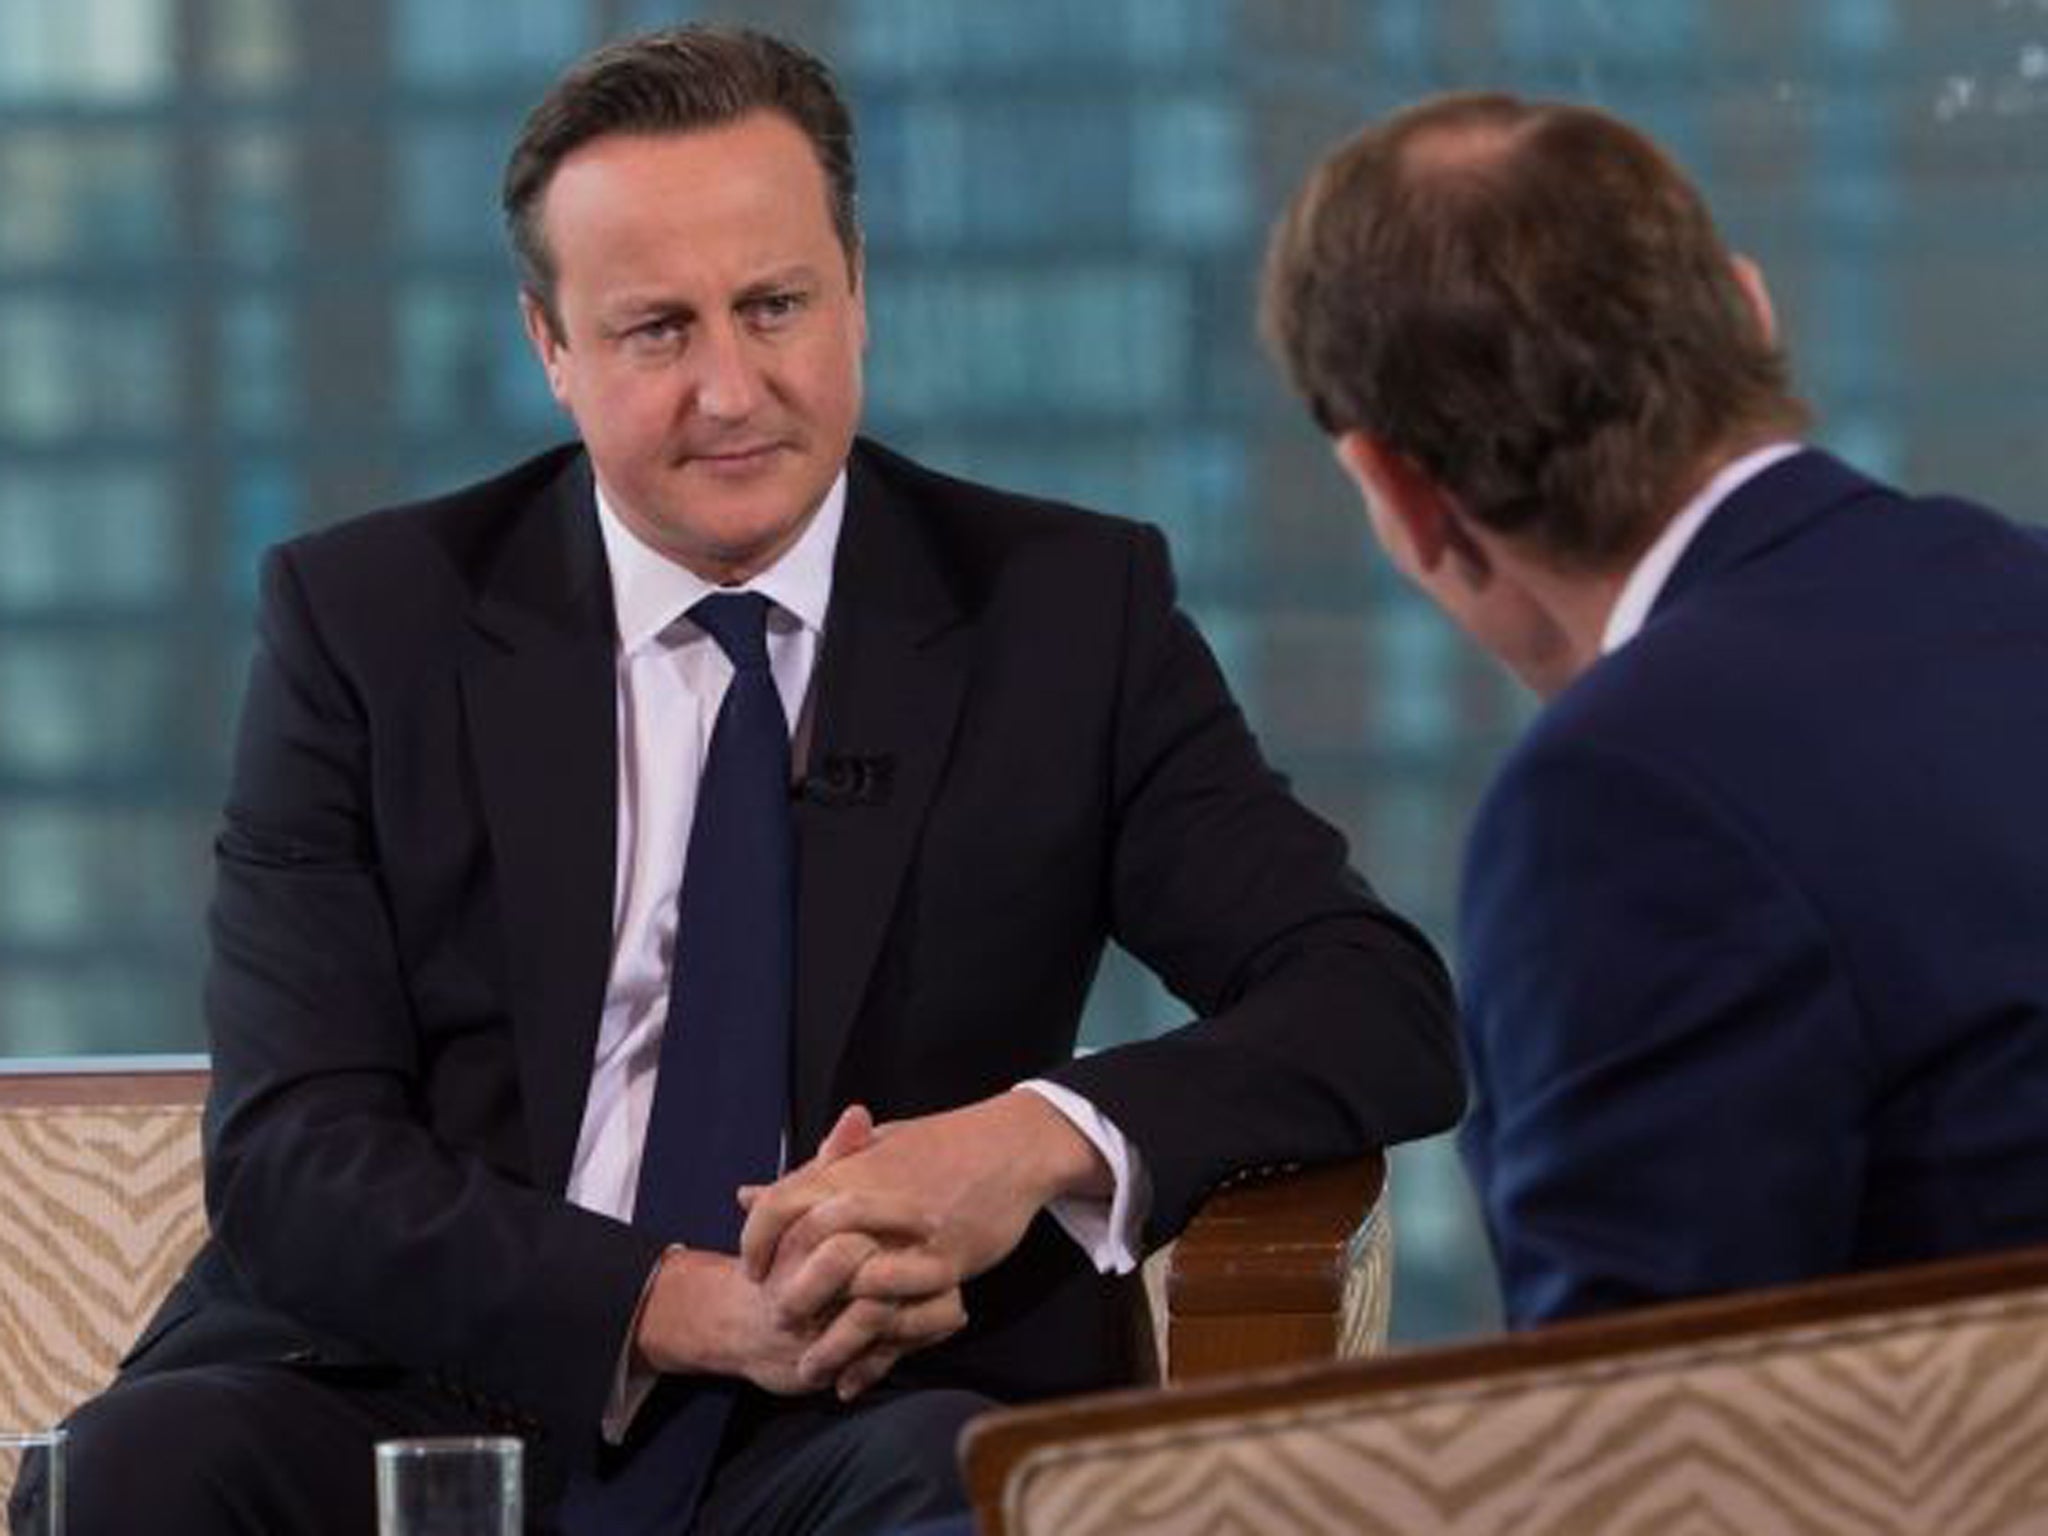 David Cameron speaking to the BBC's Andrew Marr this morning